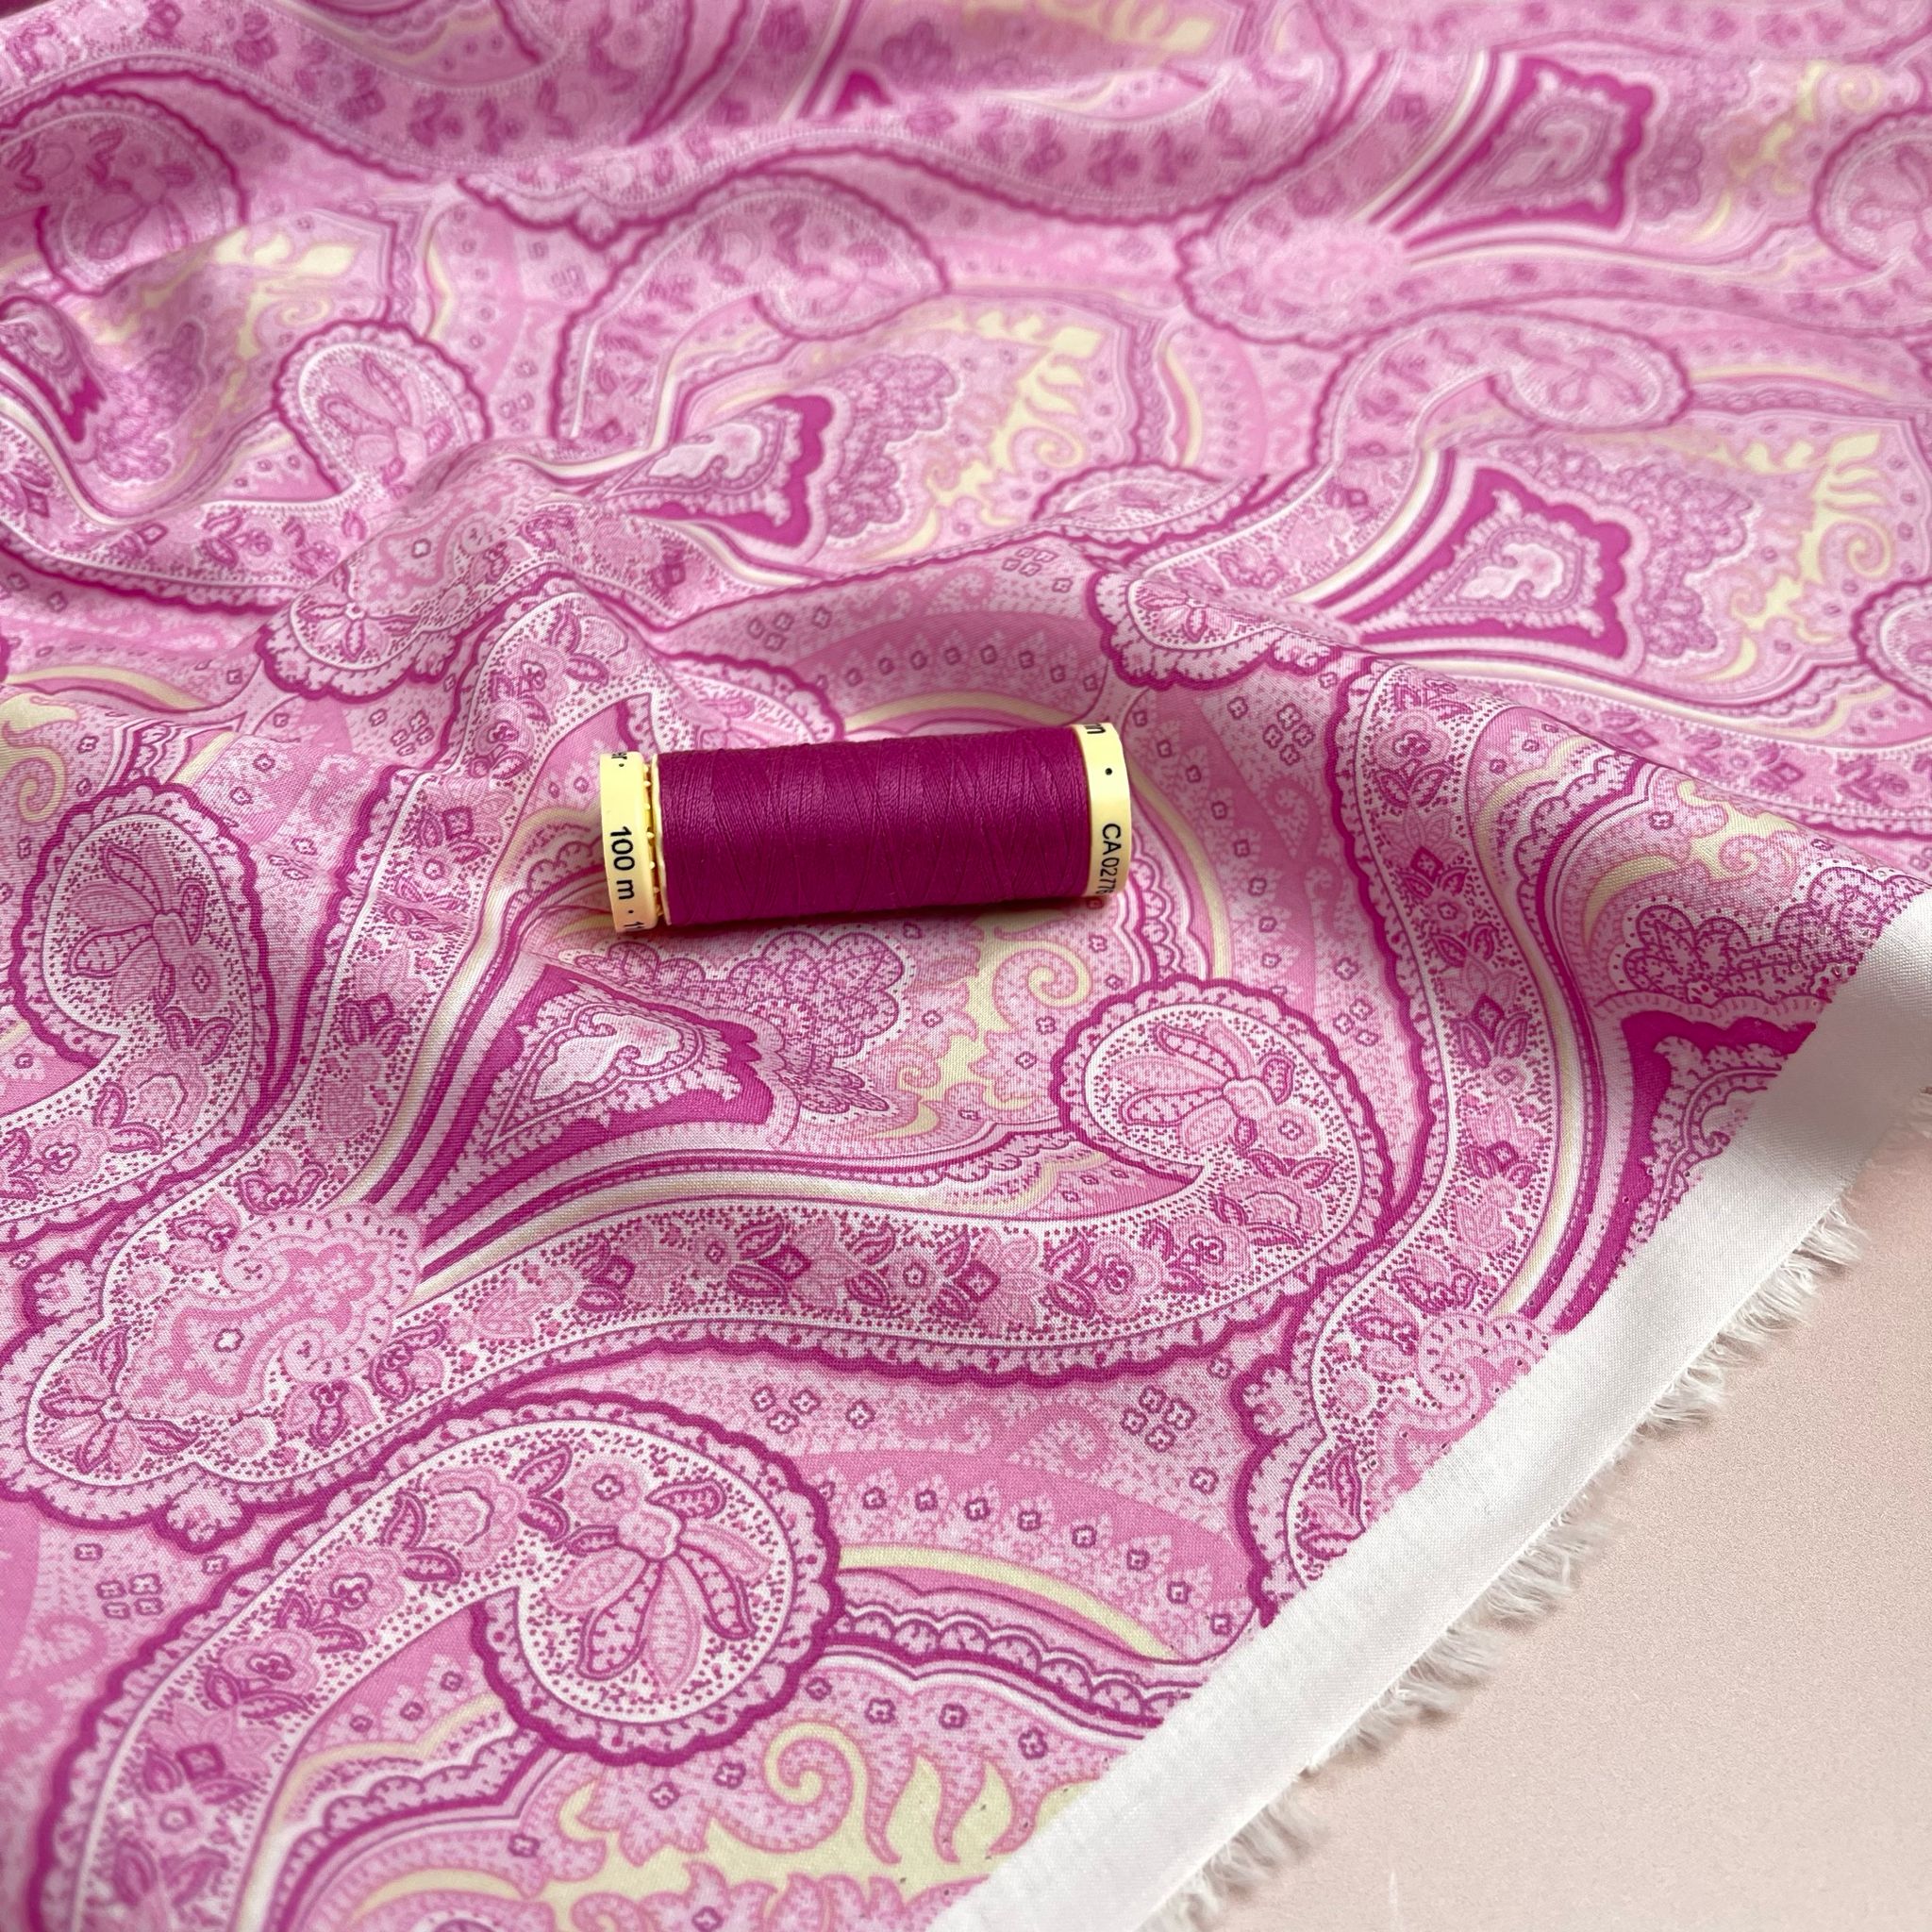 Pink Paisley Cotton Lawn Fabric